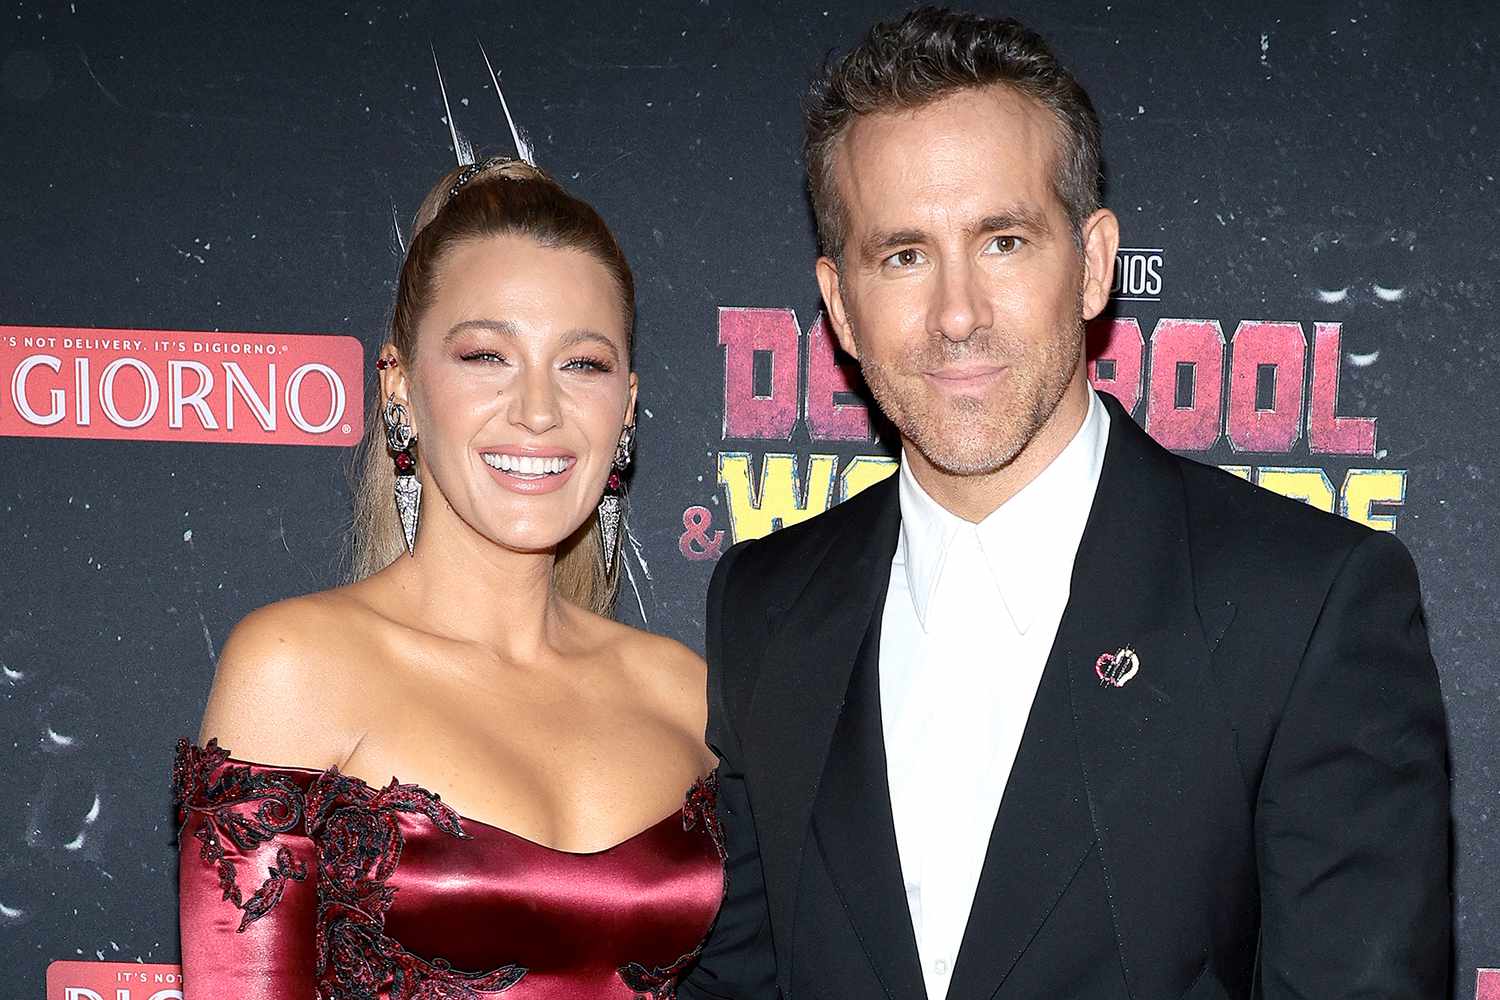 Blake Lively Highlights Composer Who Worked on 'It Ends with Us' and 'Deadpool': 'My Husband and I Share More Than Children'